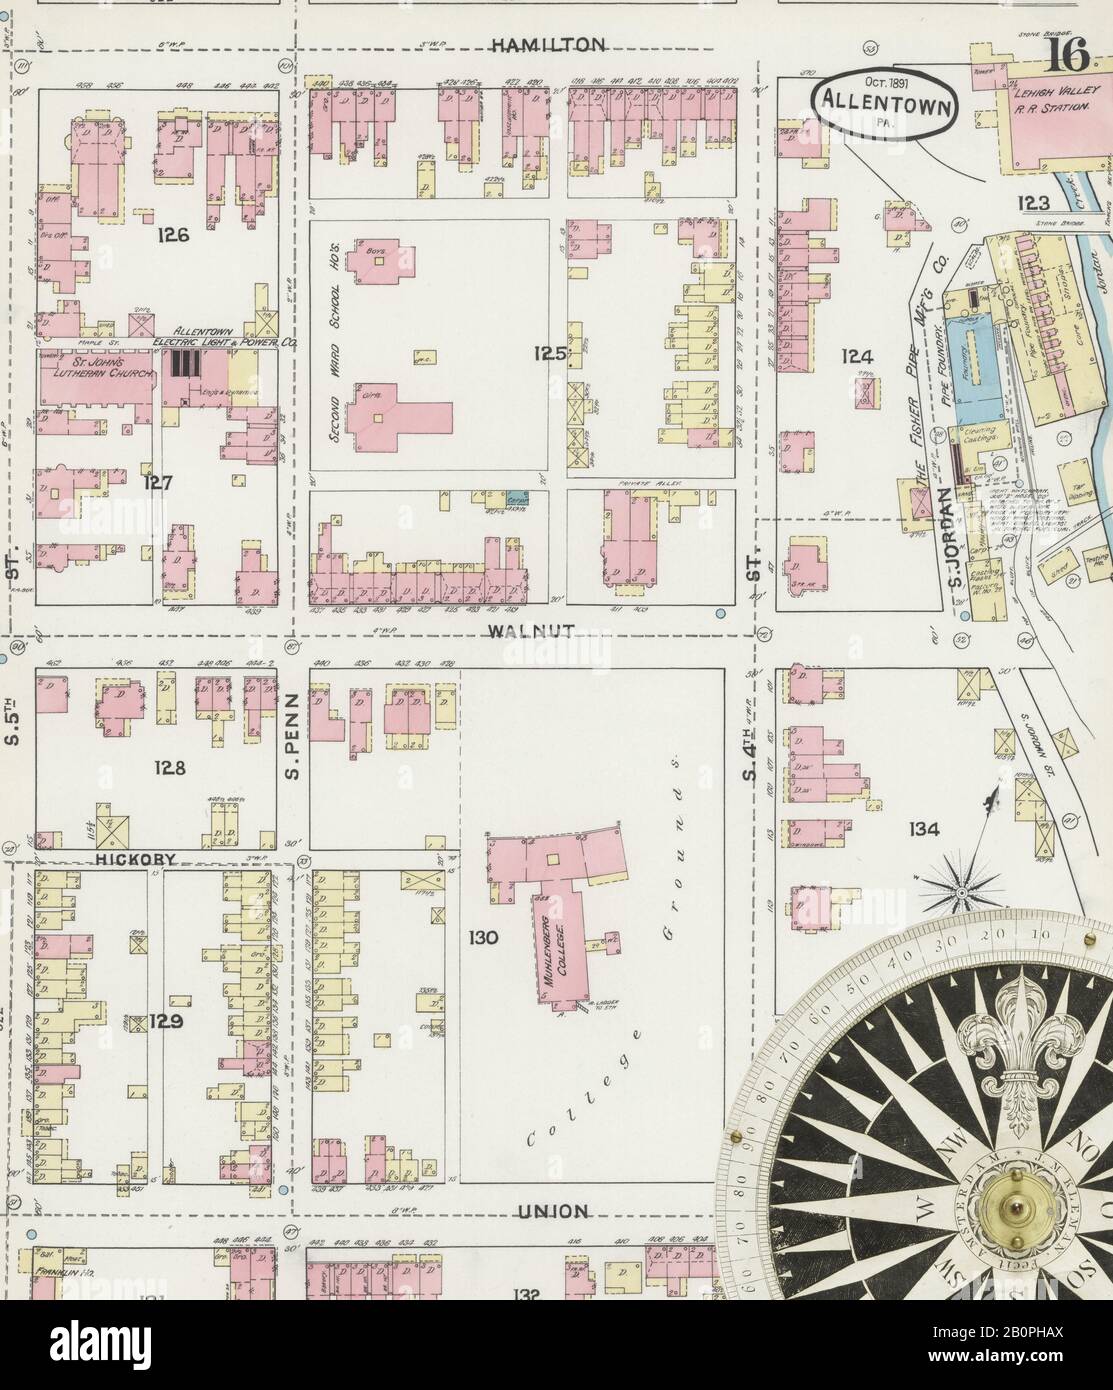 Image 16 of Sanborn Fire Insurance Map from Allentown, Lehigh County, Pennsylvania. Oct 1891. 32 Sheet(s), America, street map with a Nineteenth Century compass Stock Photo